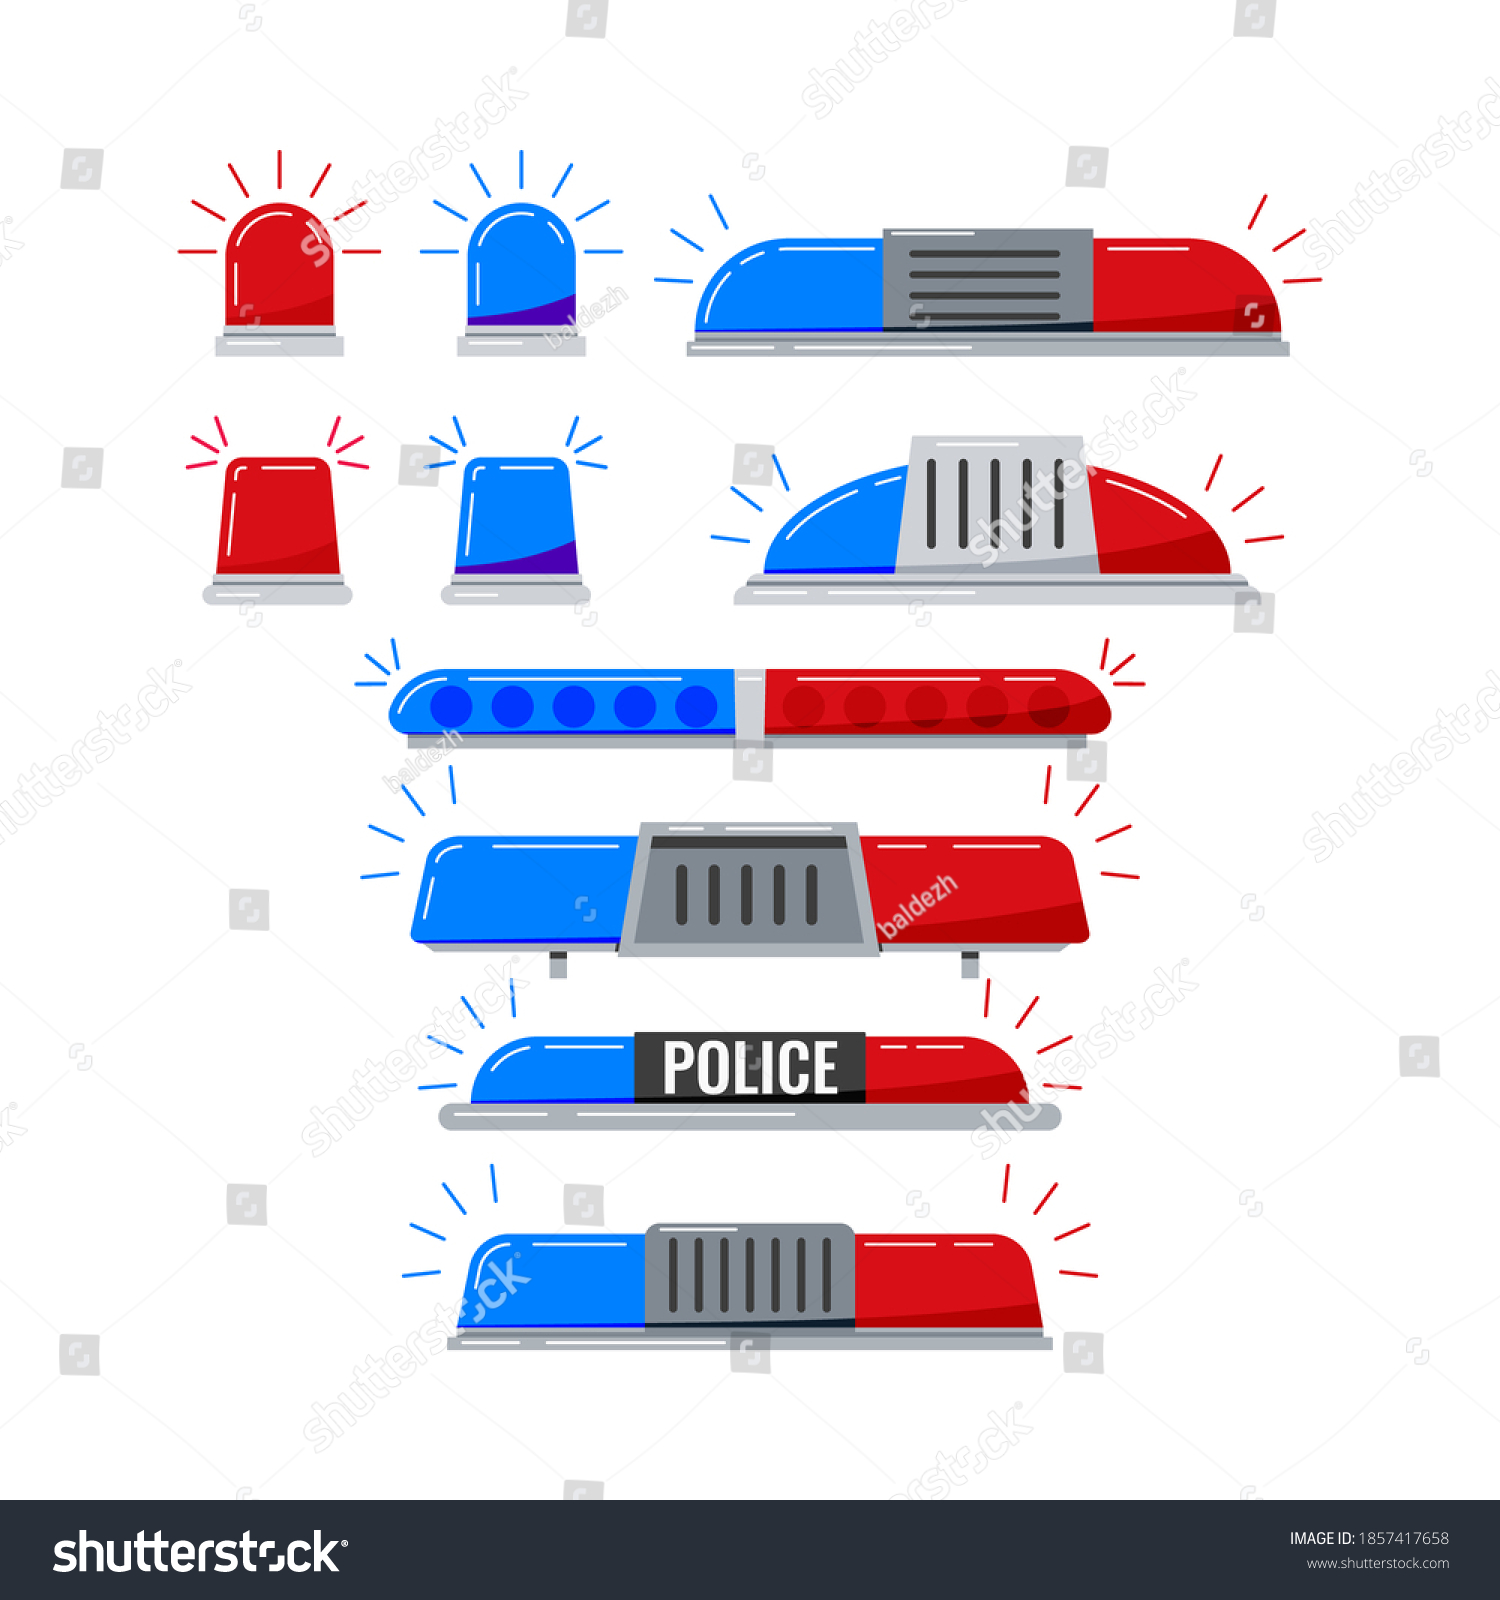 SVG of Police car light flashers vector icon set isolated on white background. Red and blue color alert flashing lights in flat cartoon style. Siren police rescue or ambulance light illustration.  svg